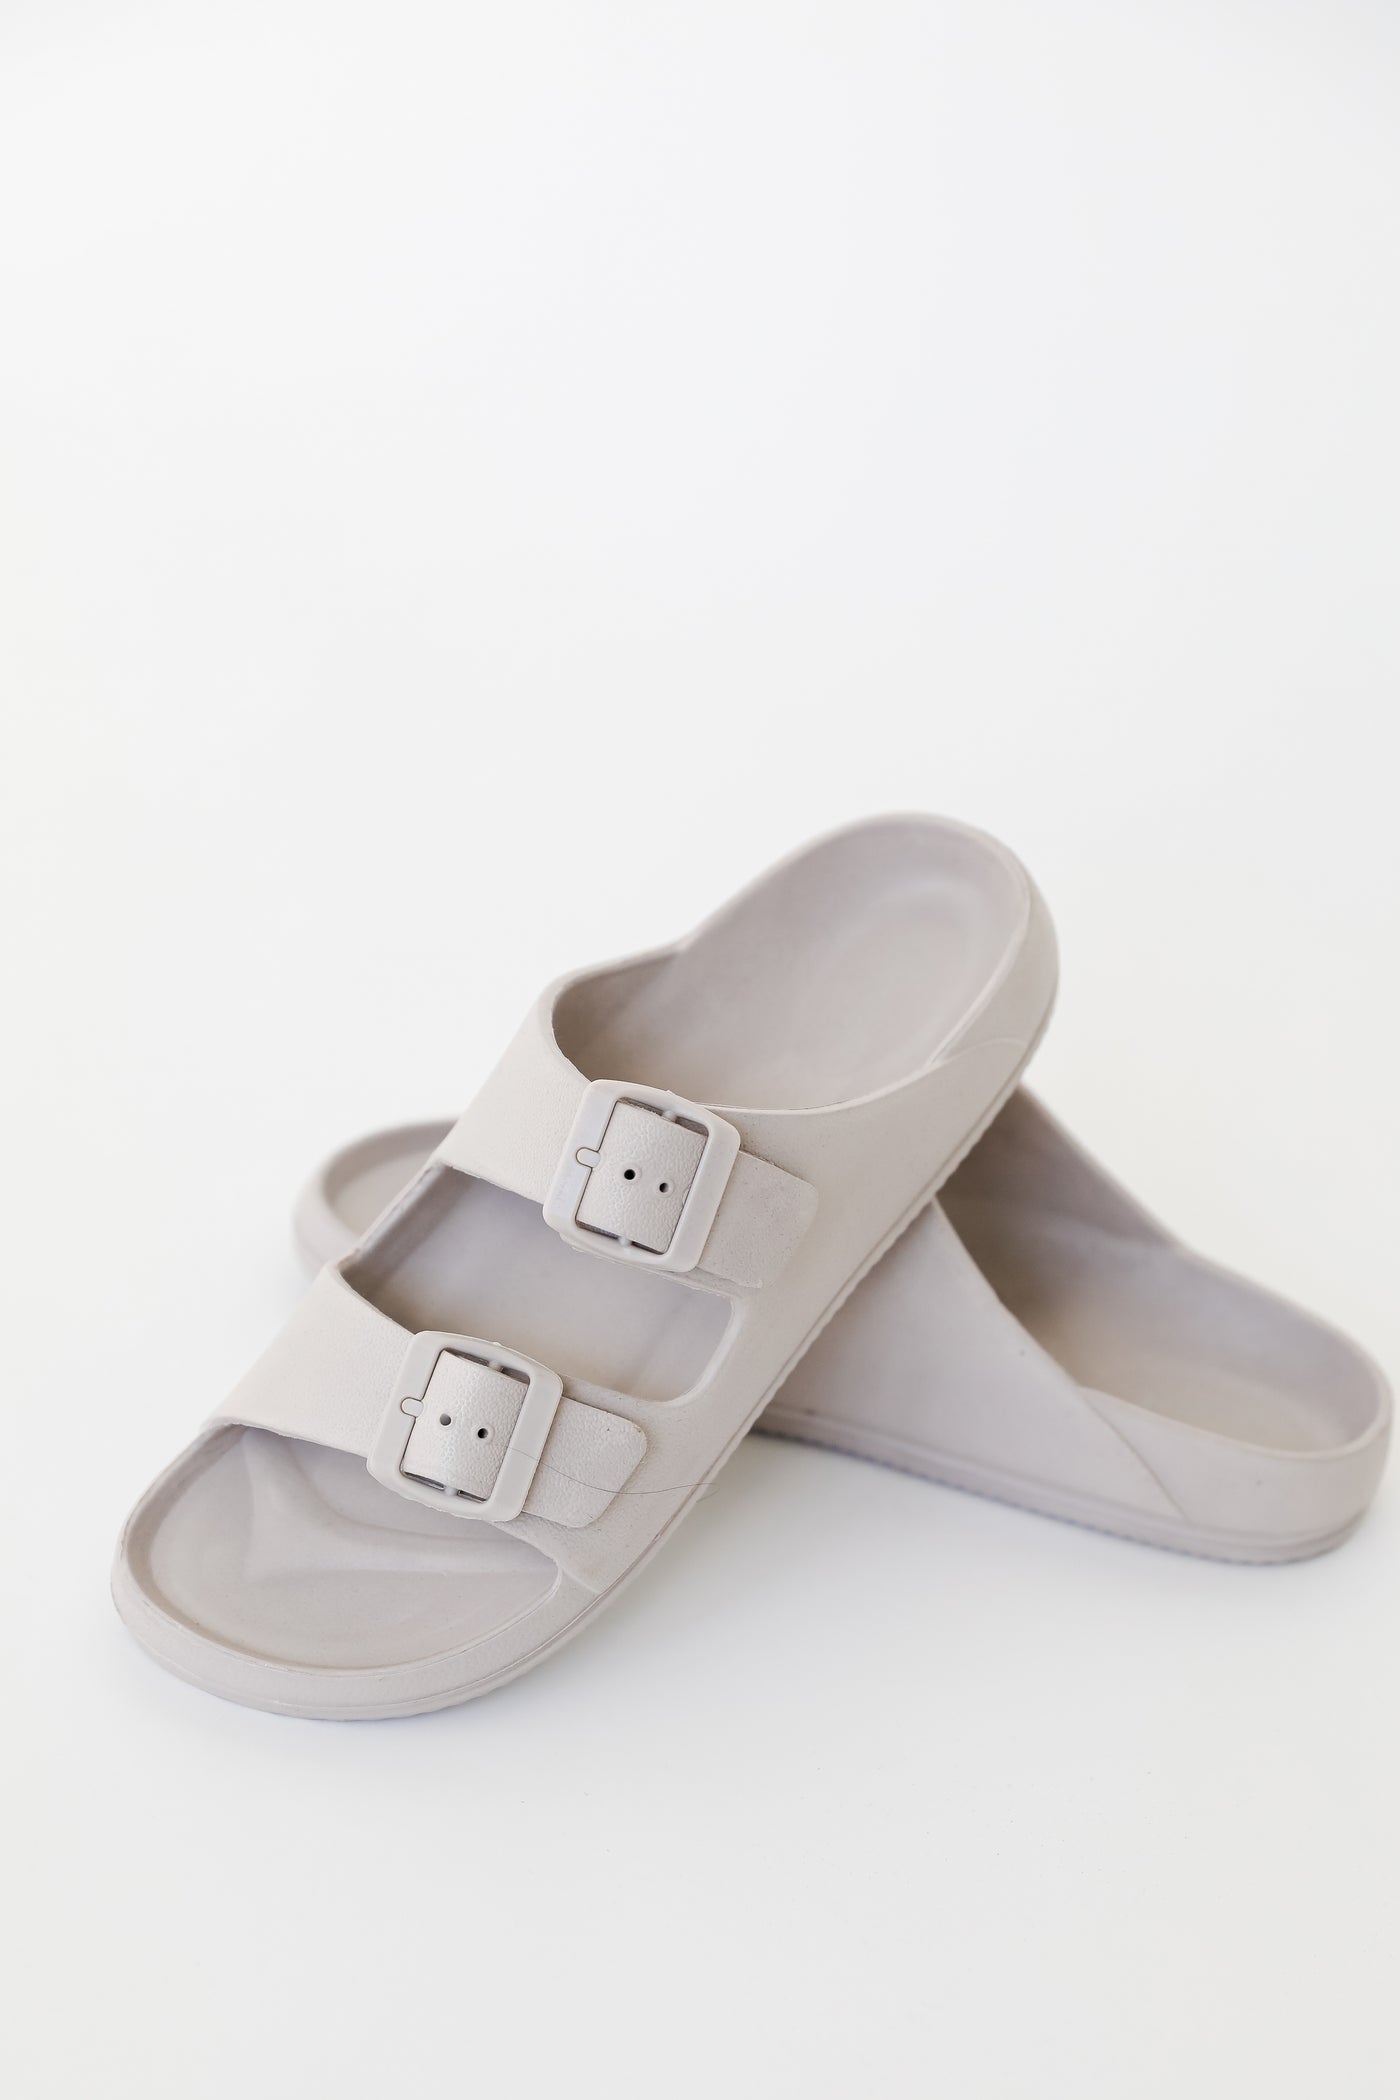 Double Strap Sandals in grey close up